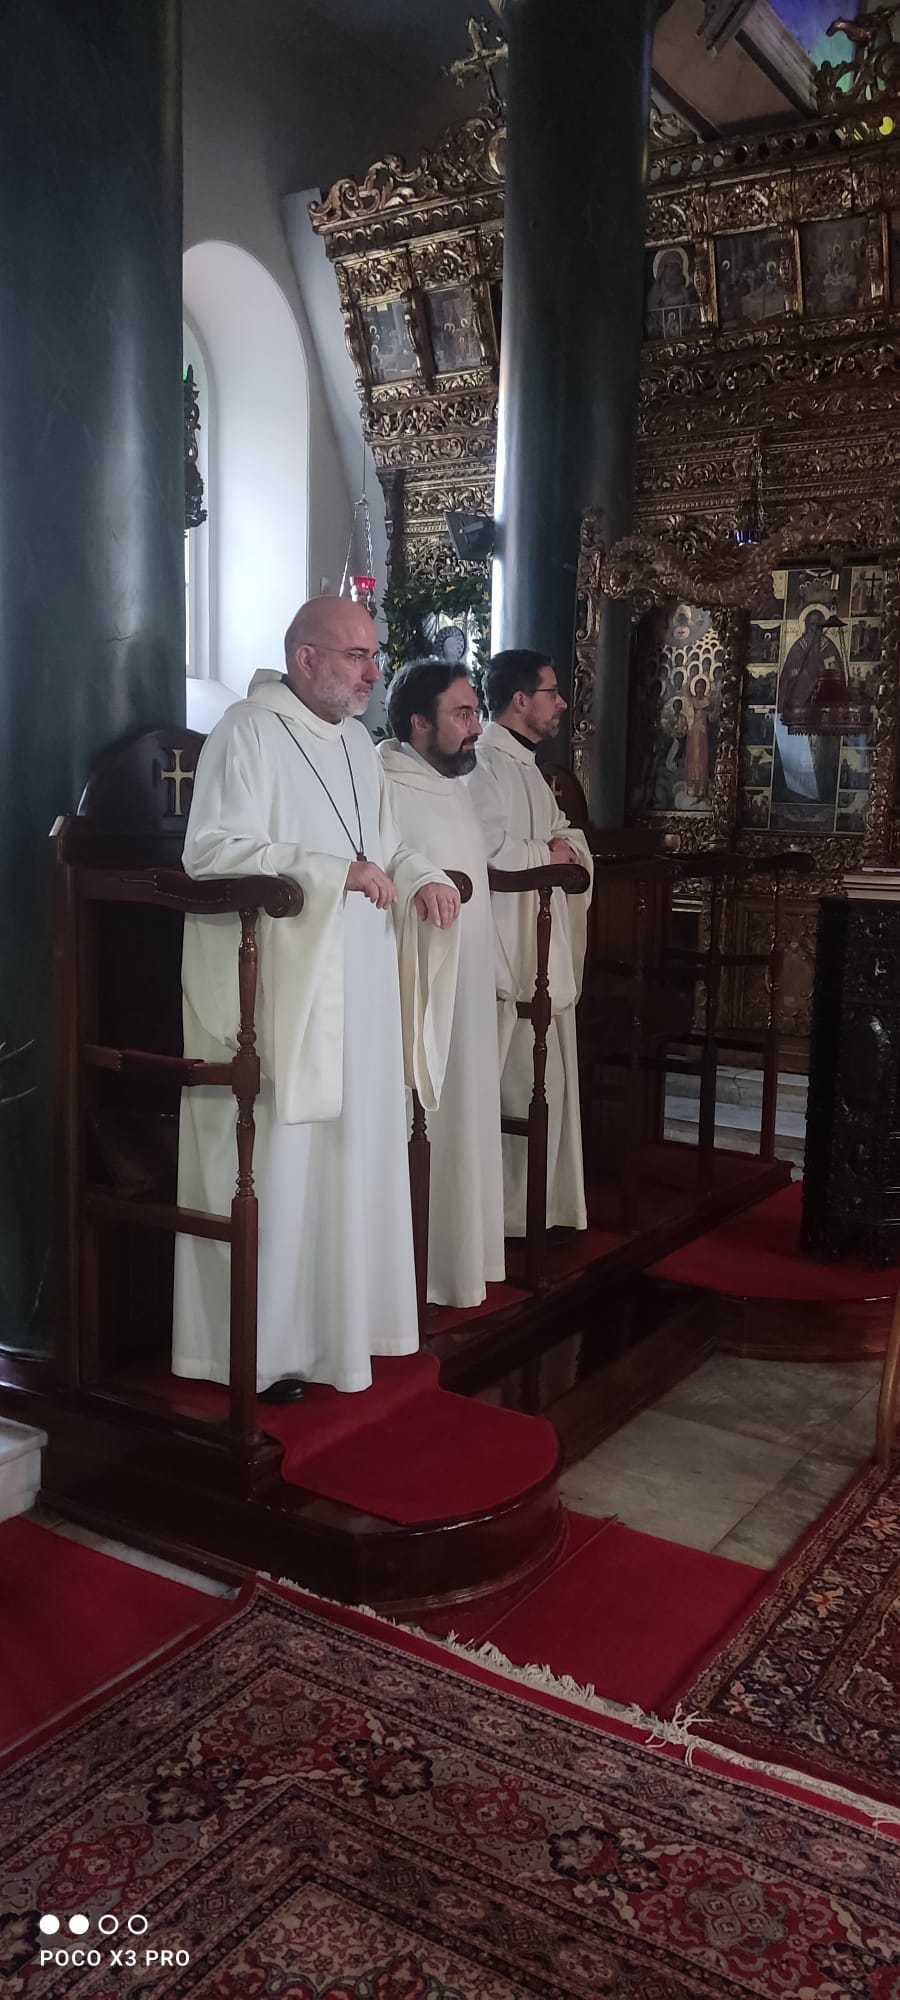 The Vespers for the Feast of Saint Photios the Great at the Theological School of Halki